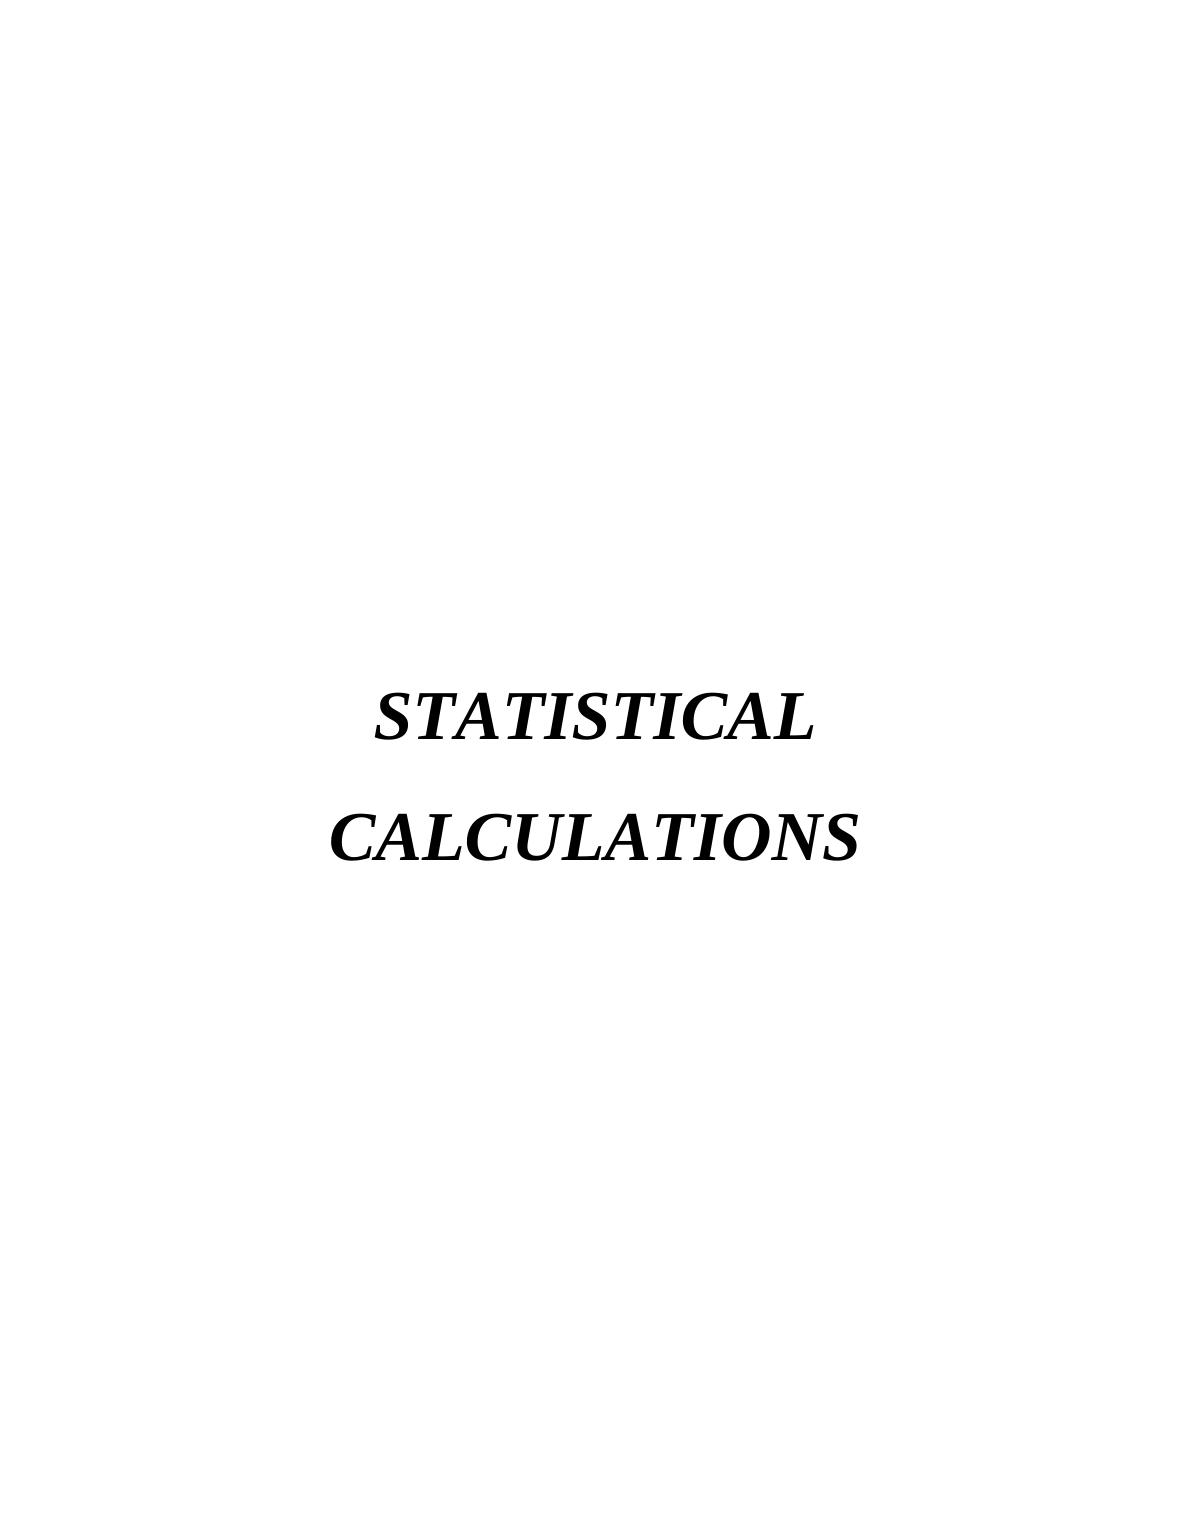 An Introduction to Statistics : Assignment_1